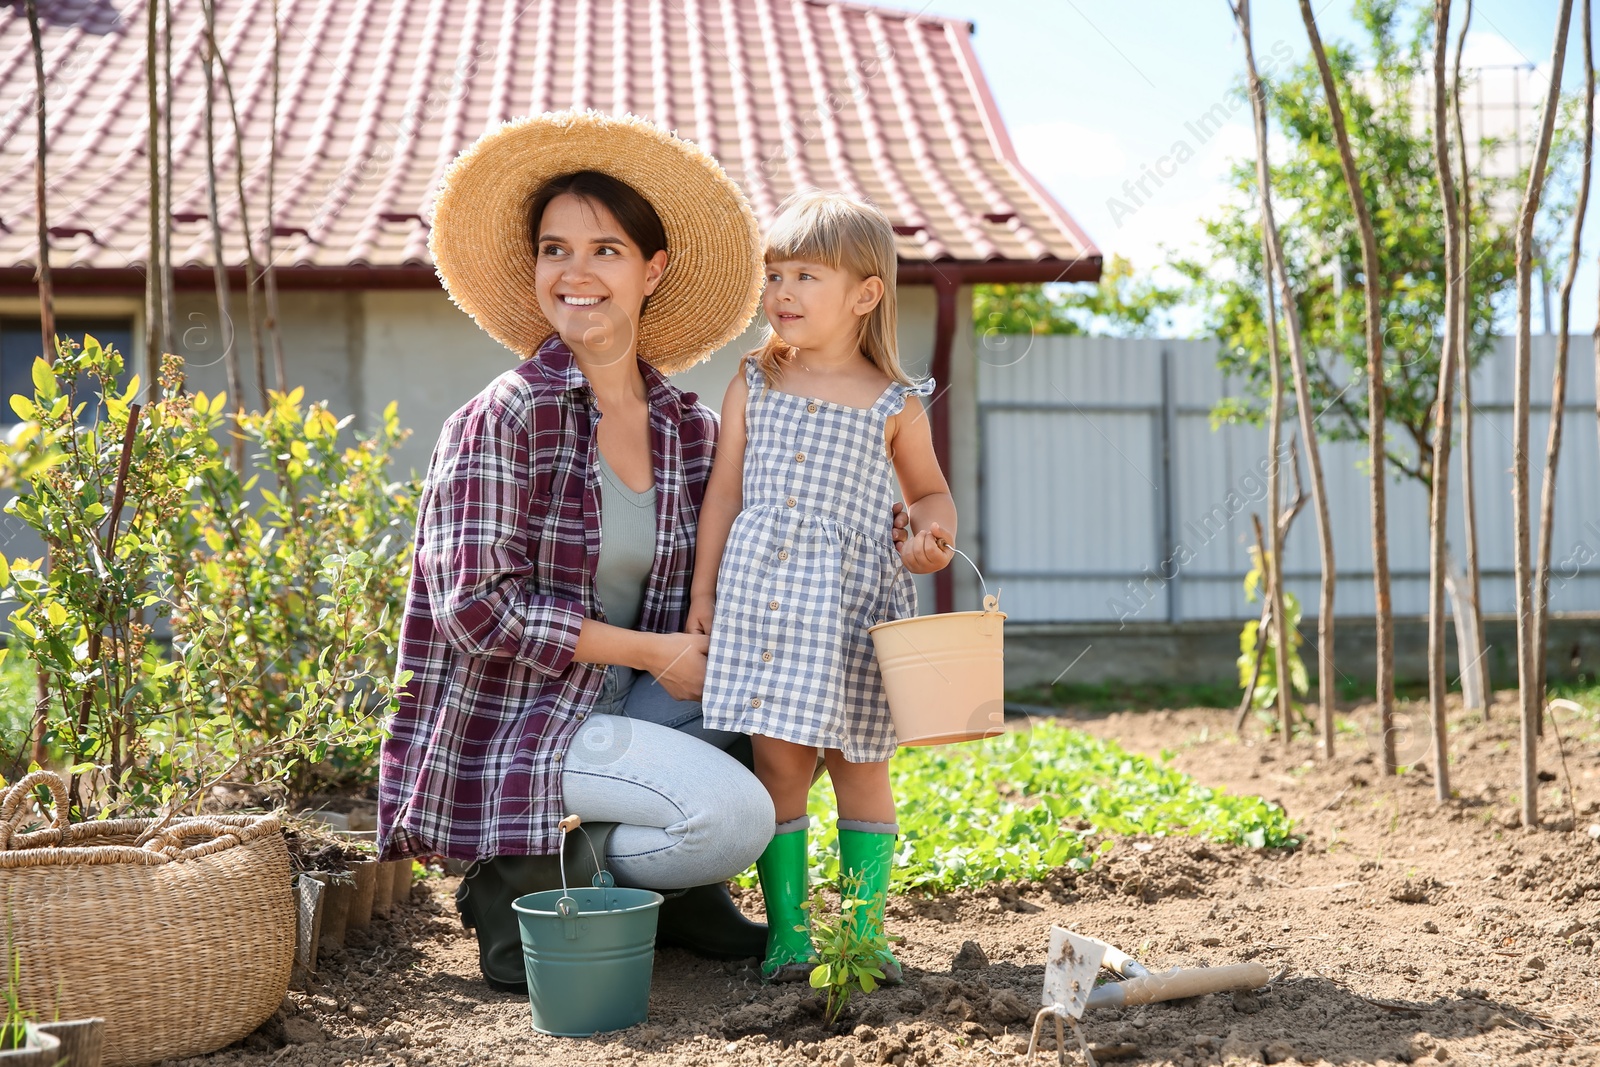 Photo of Mother and her cute daughter planting tree together in garden